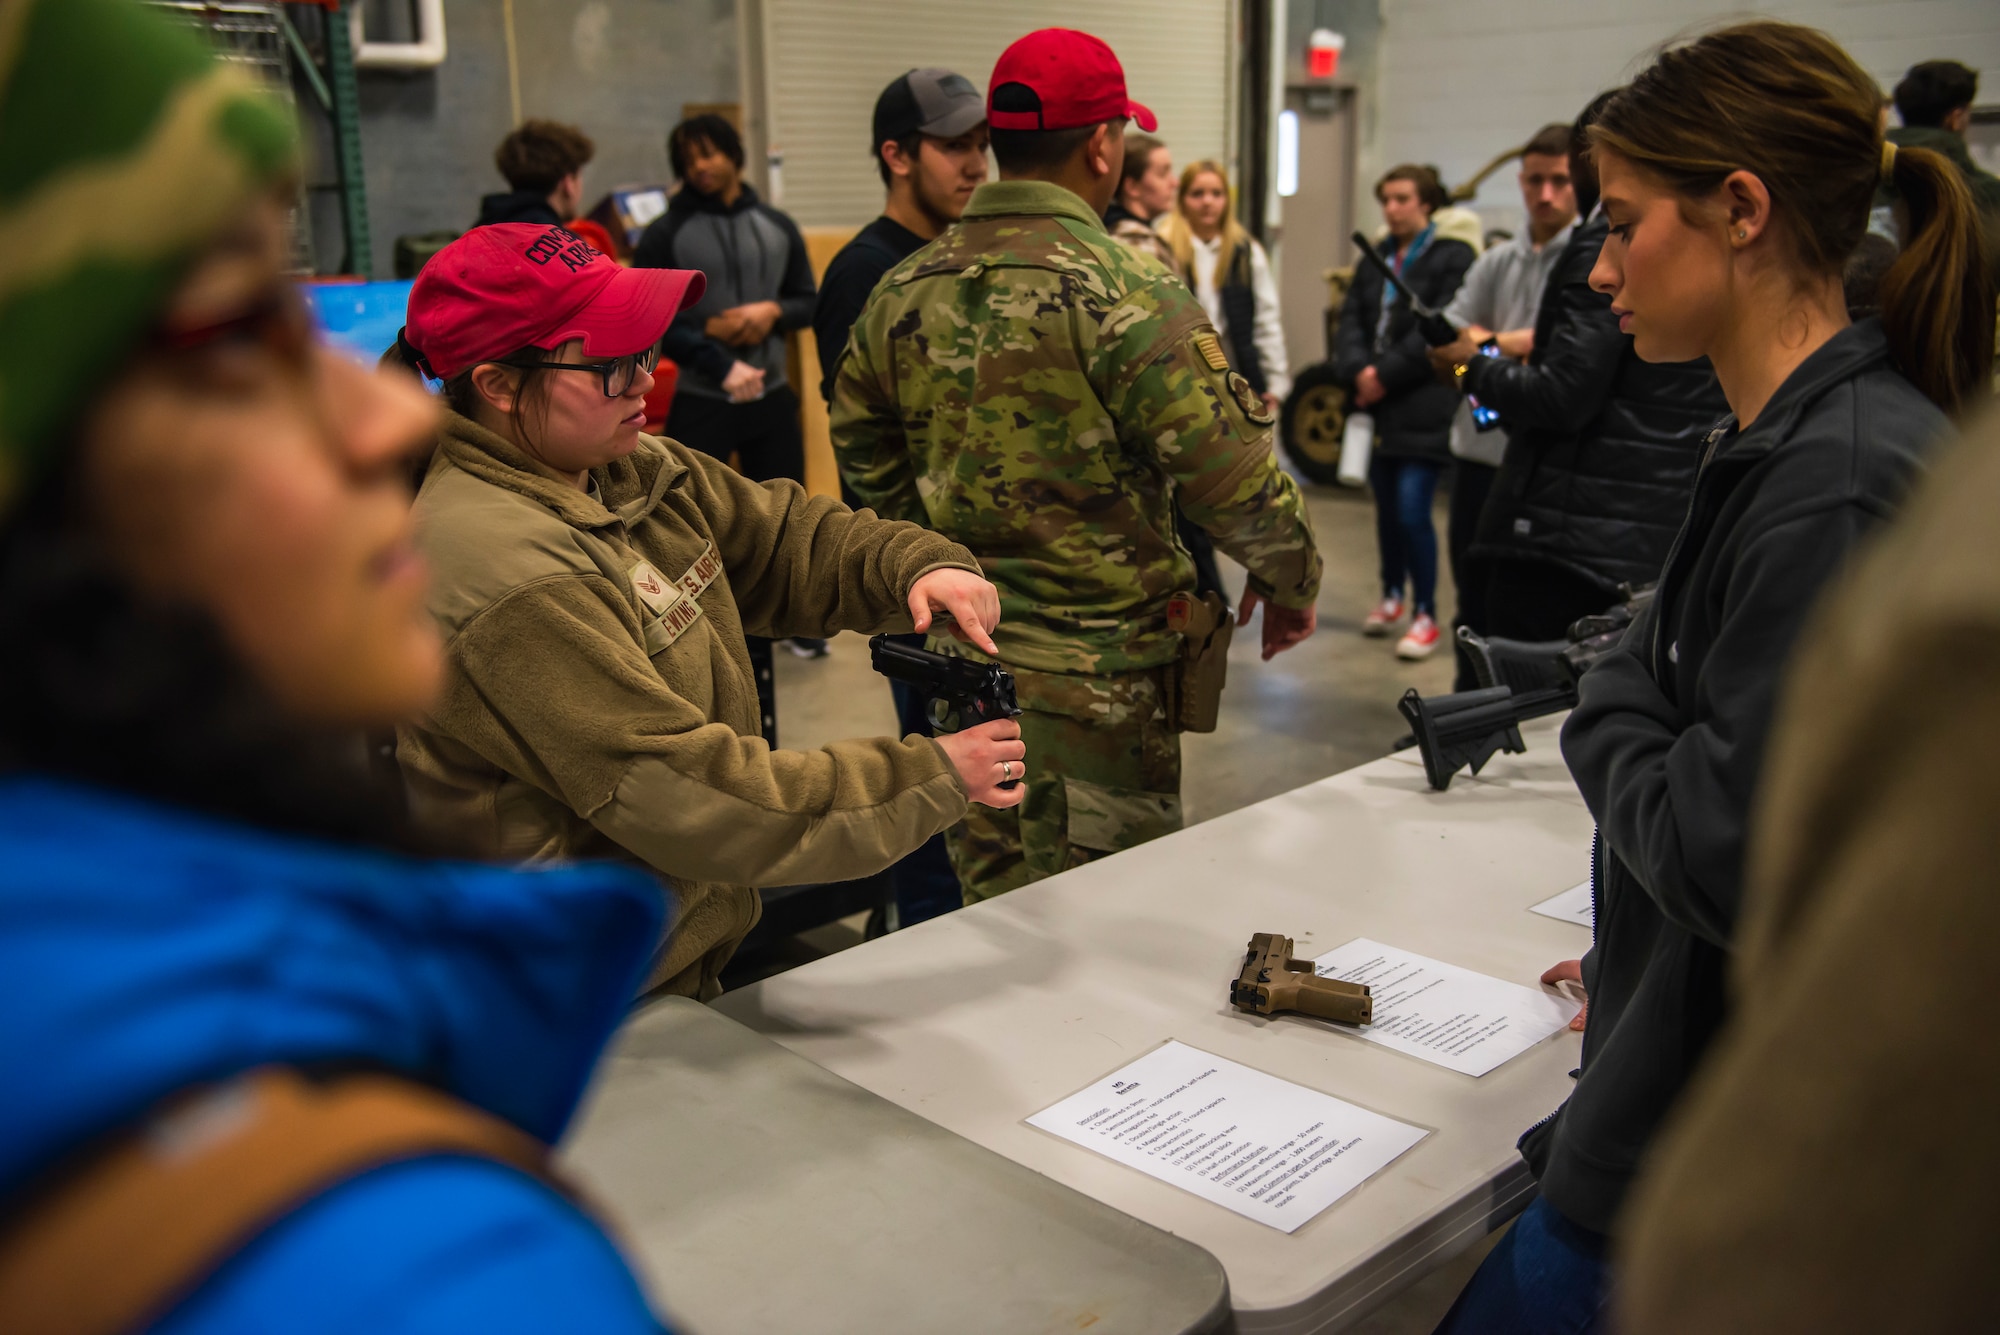 A combat arms instructor points to a part of a gun while a girl watches, in the background is another instructor speaking.